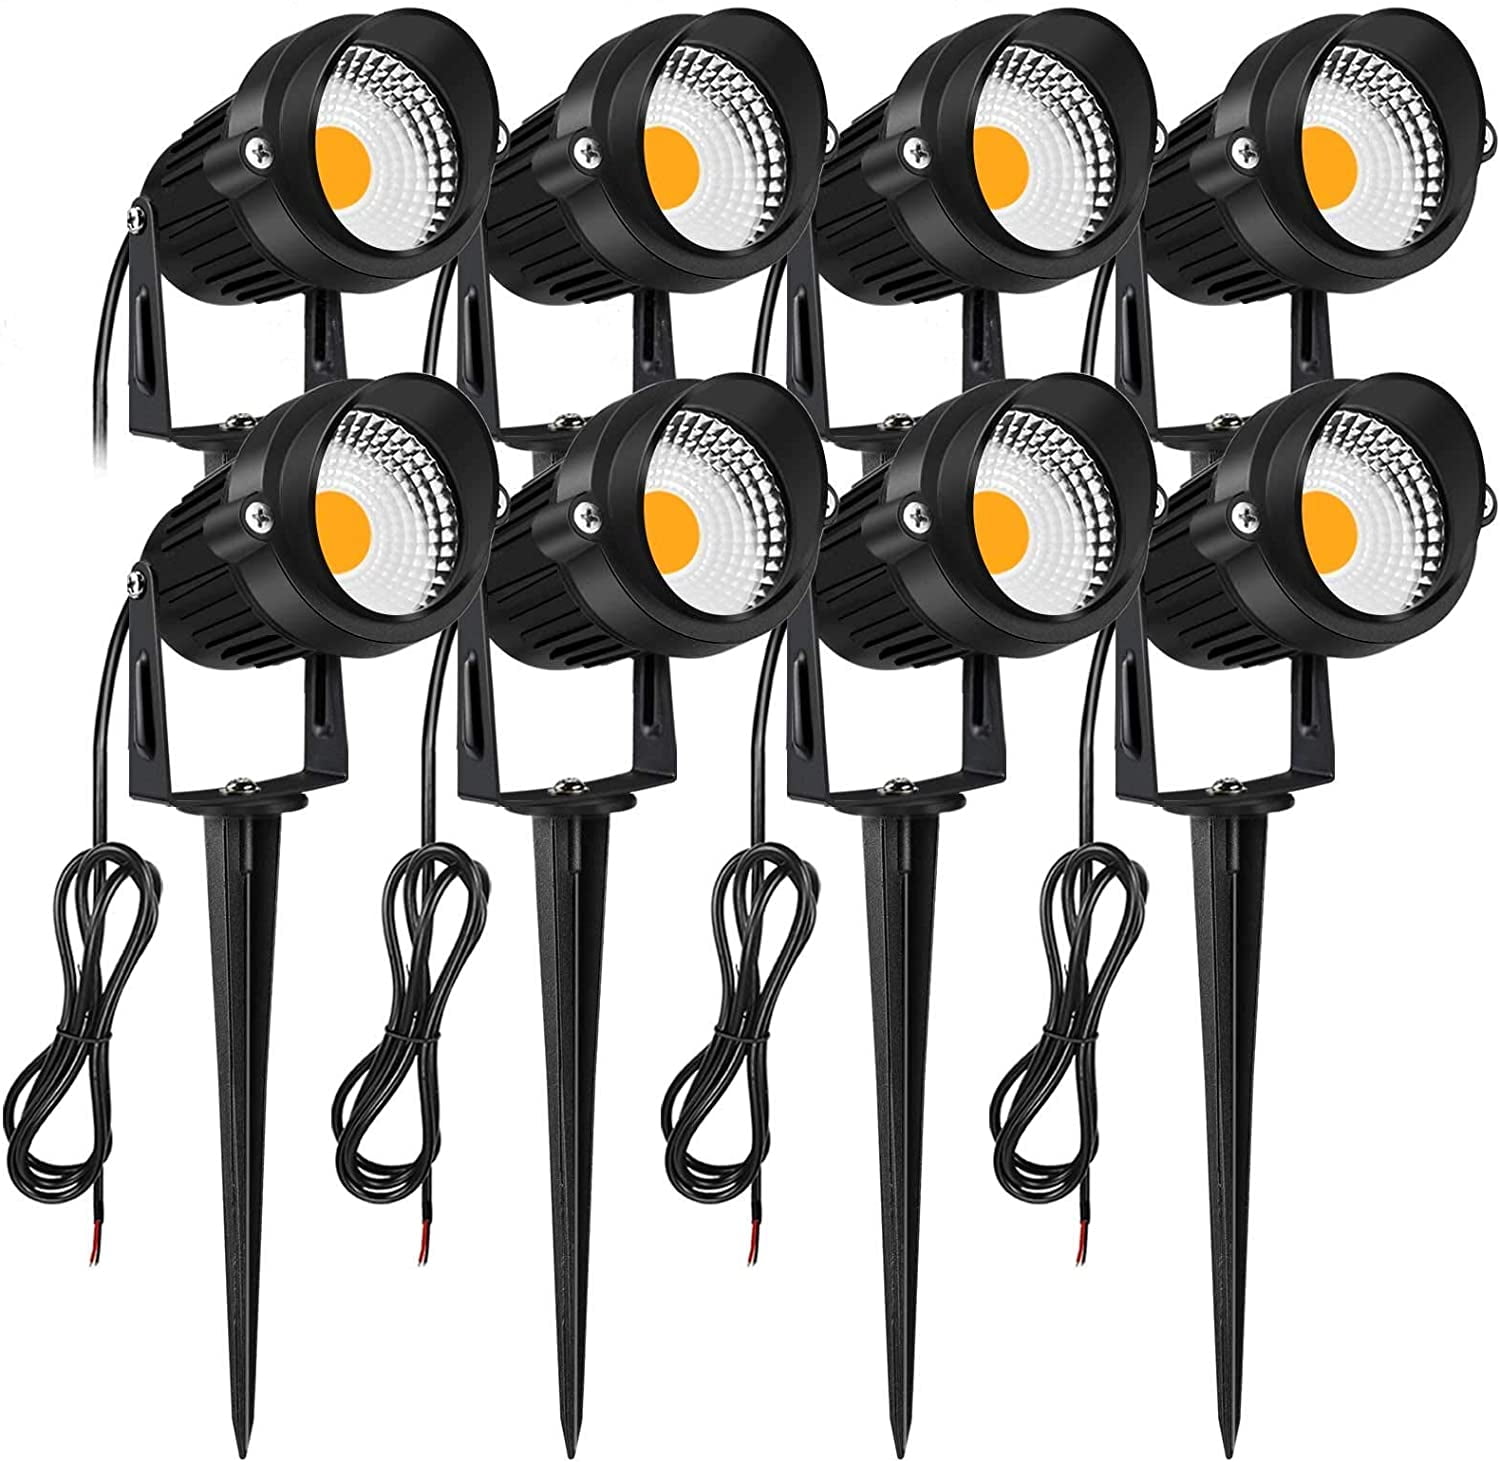 4pcs Outdoor Low Voltage Landscape Lights, 12V 5W LED Garden Lighting,  Outdoor Landscape Spotlights For Trees, Paths, Backyards, Flags (9x3.6inch)